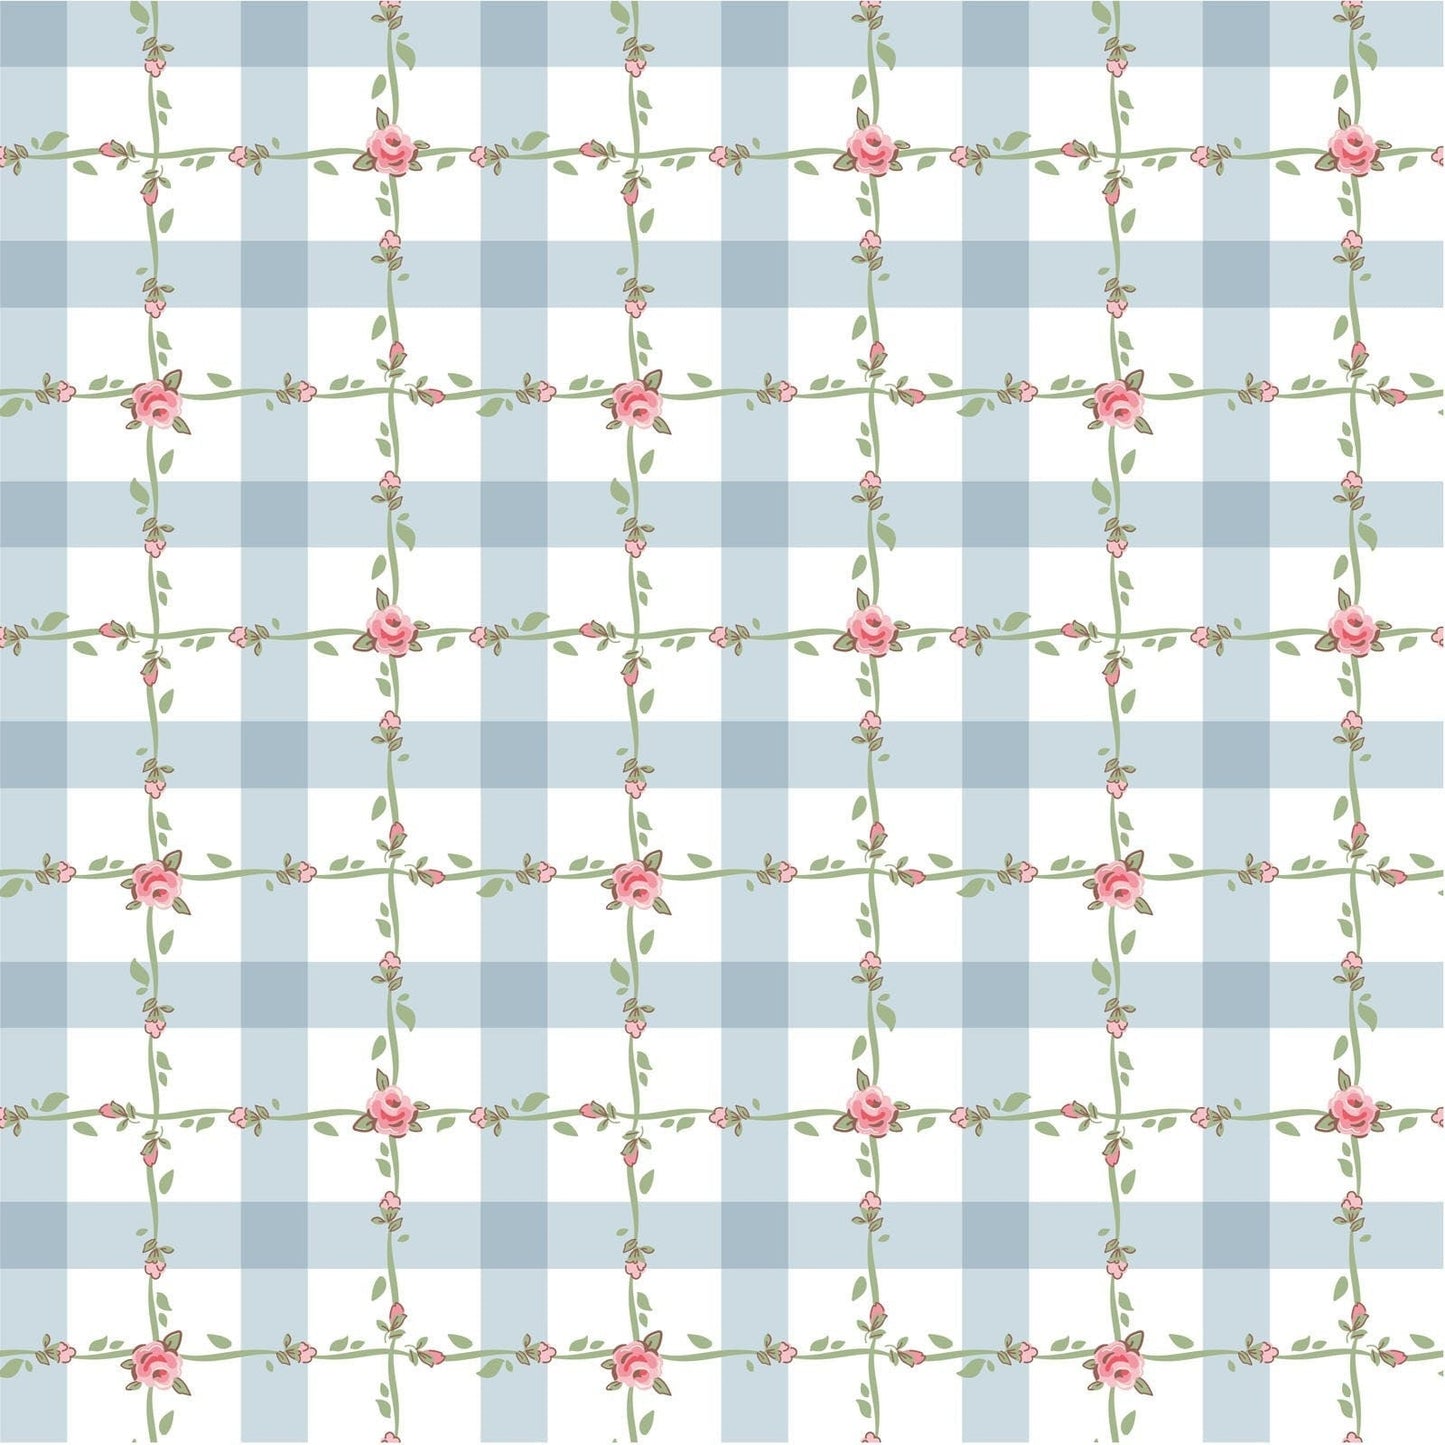 Dots & Posies Charm Pack of Quilter&#39;s Cotton by Poppie Cotton 42 piece collection of 5 inch squares